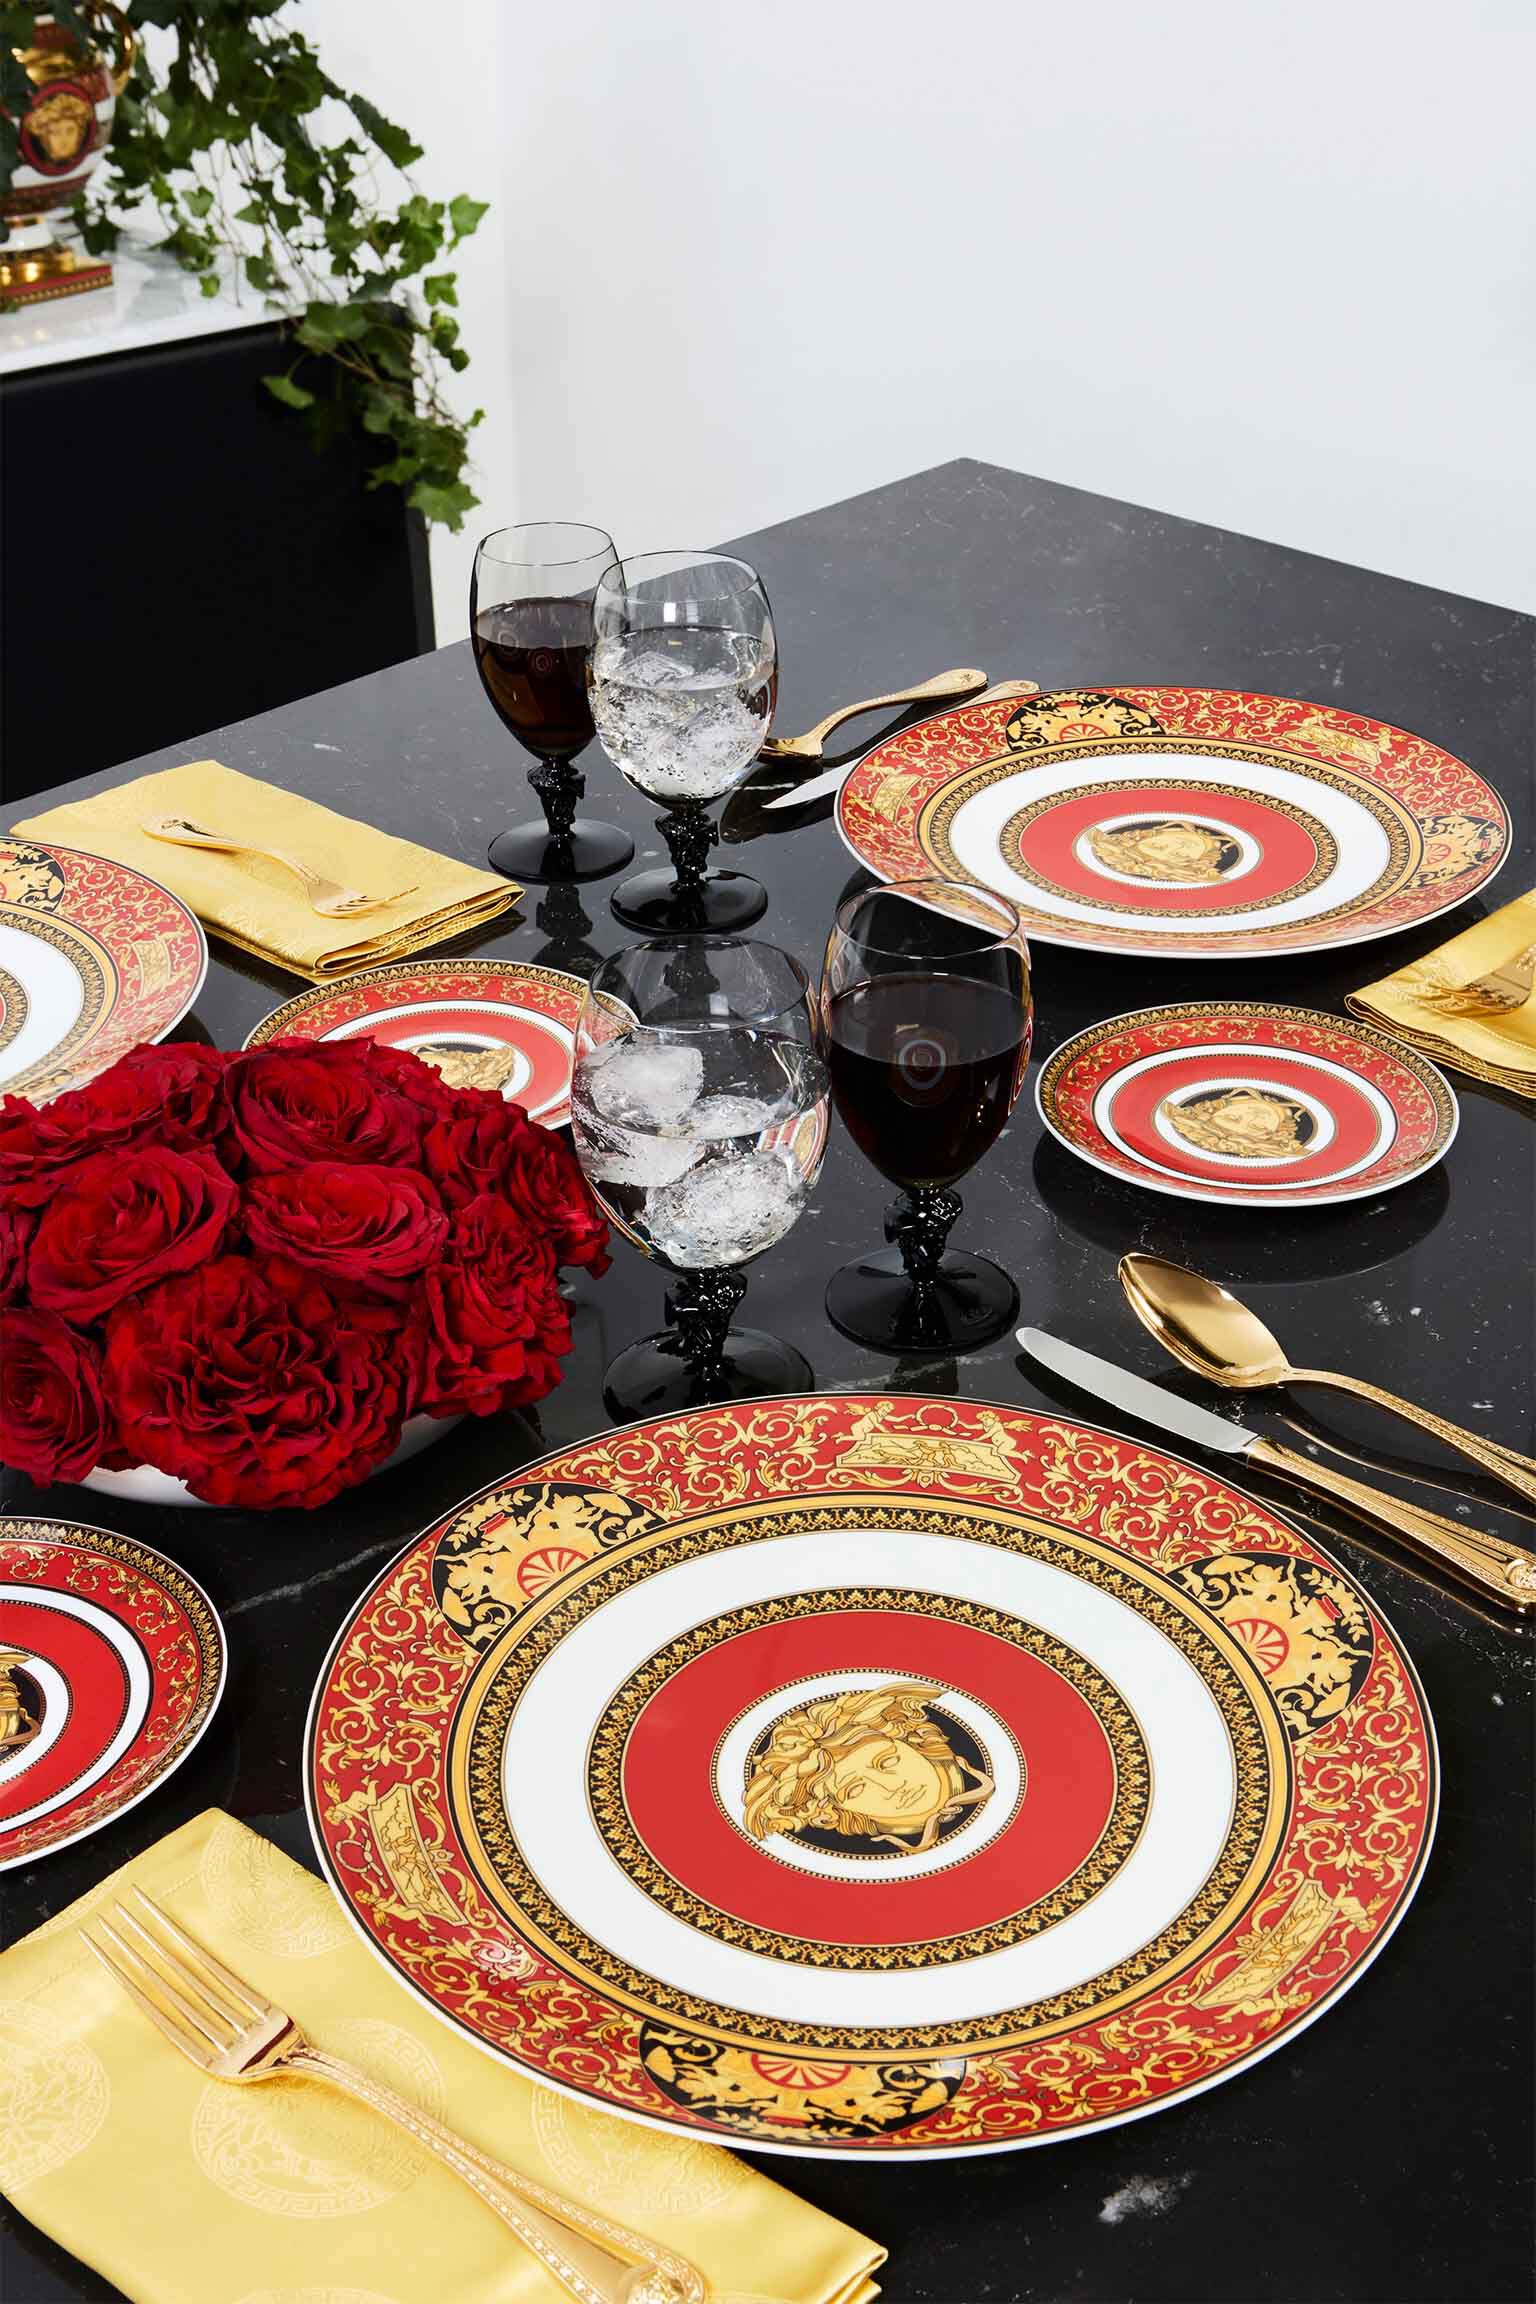 https://www.rosenthal.de/dw/image/v2/BGMT_PRD/on/demandware.static/-/Library-Sites-ros-library-shared/default/dw9134df2d/PLPs/collections/Versace/Medusa_new-dining_1536x2304.jpg